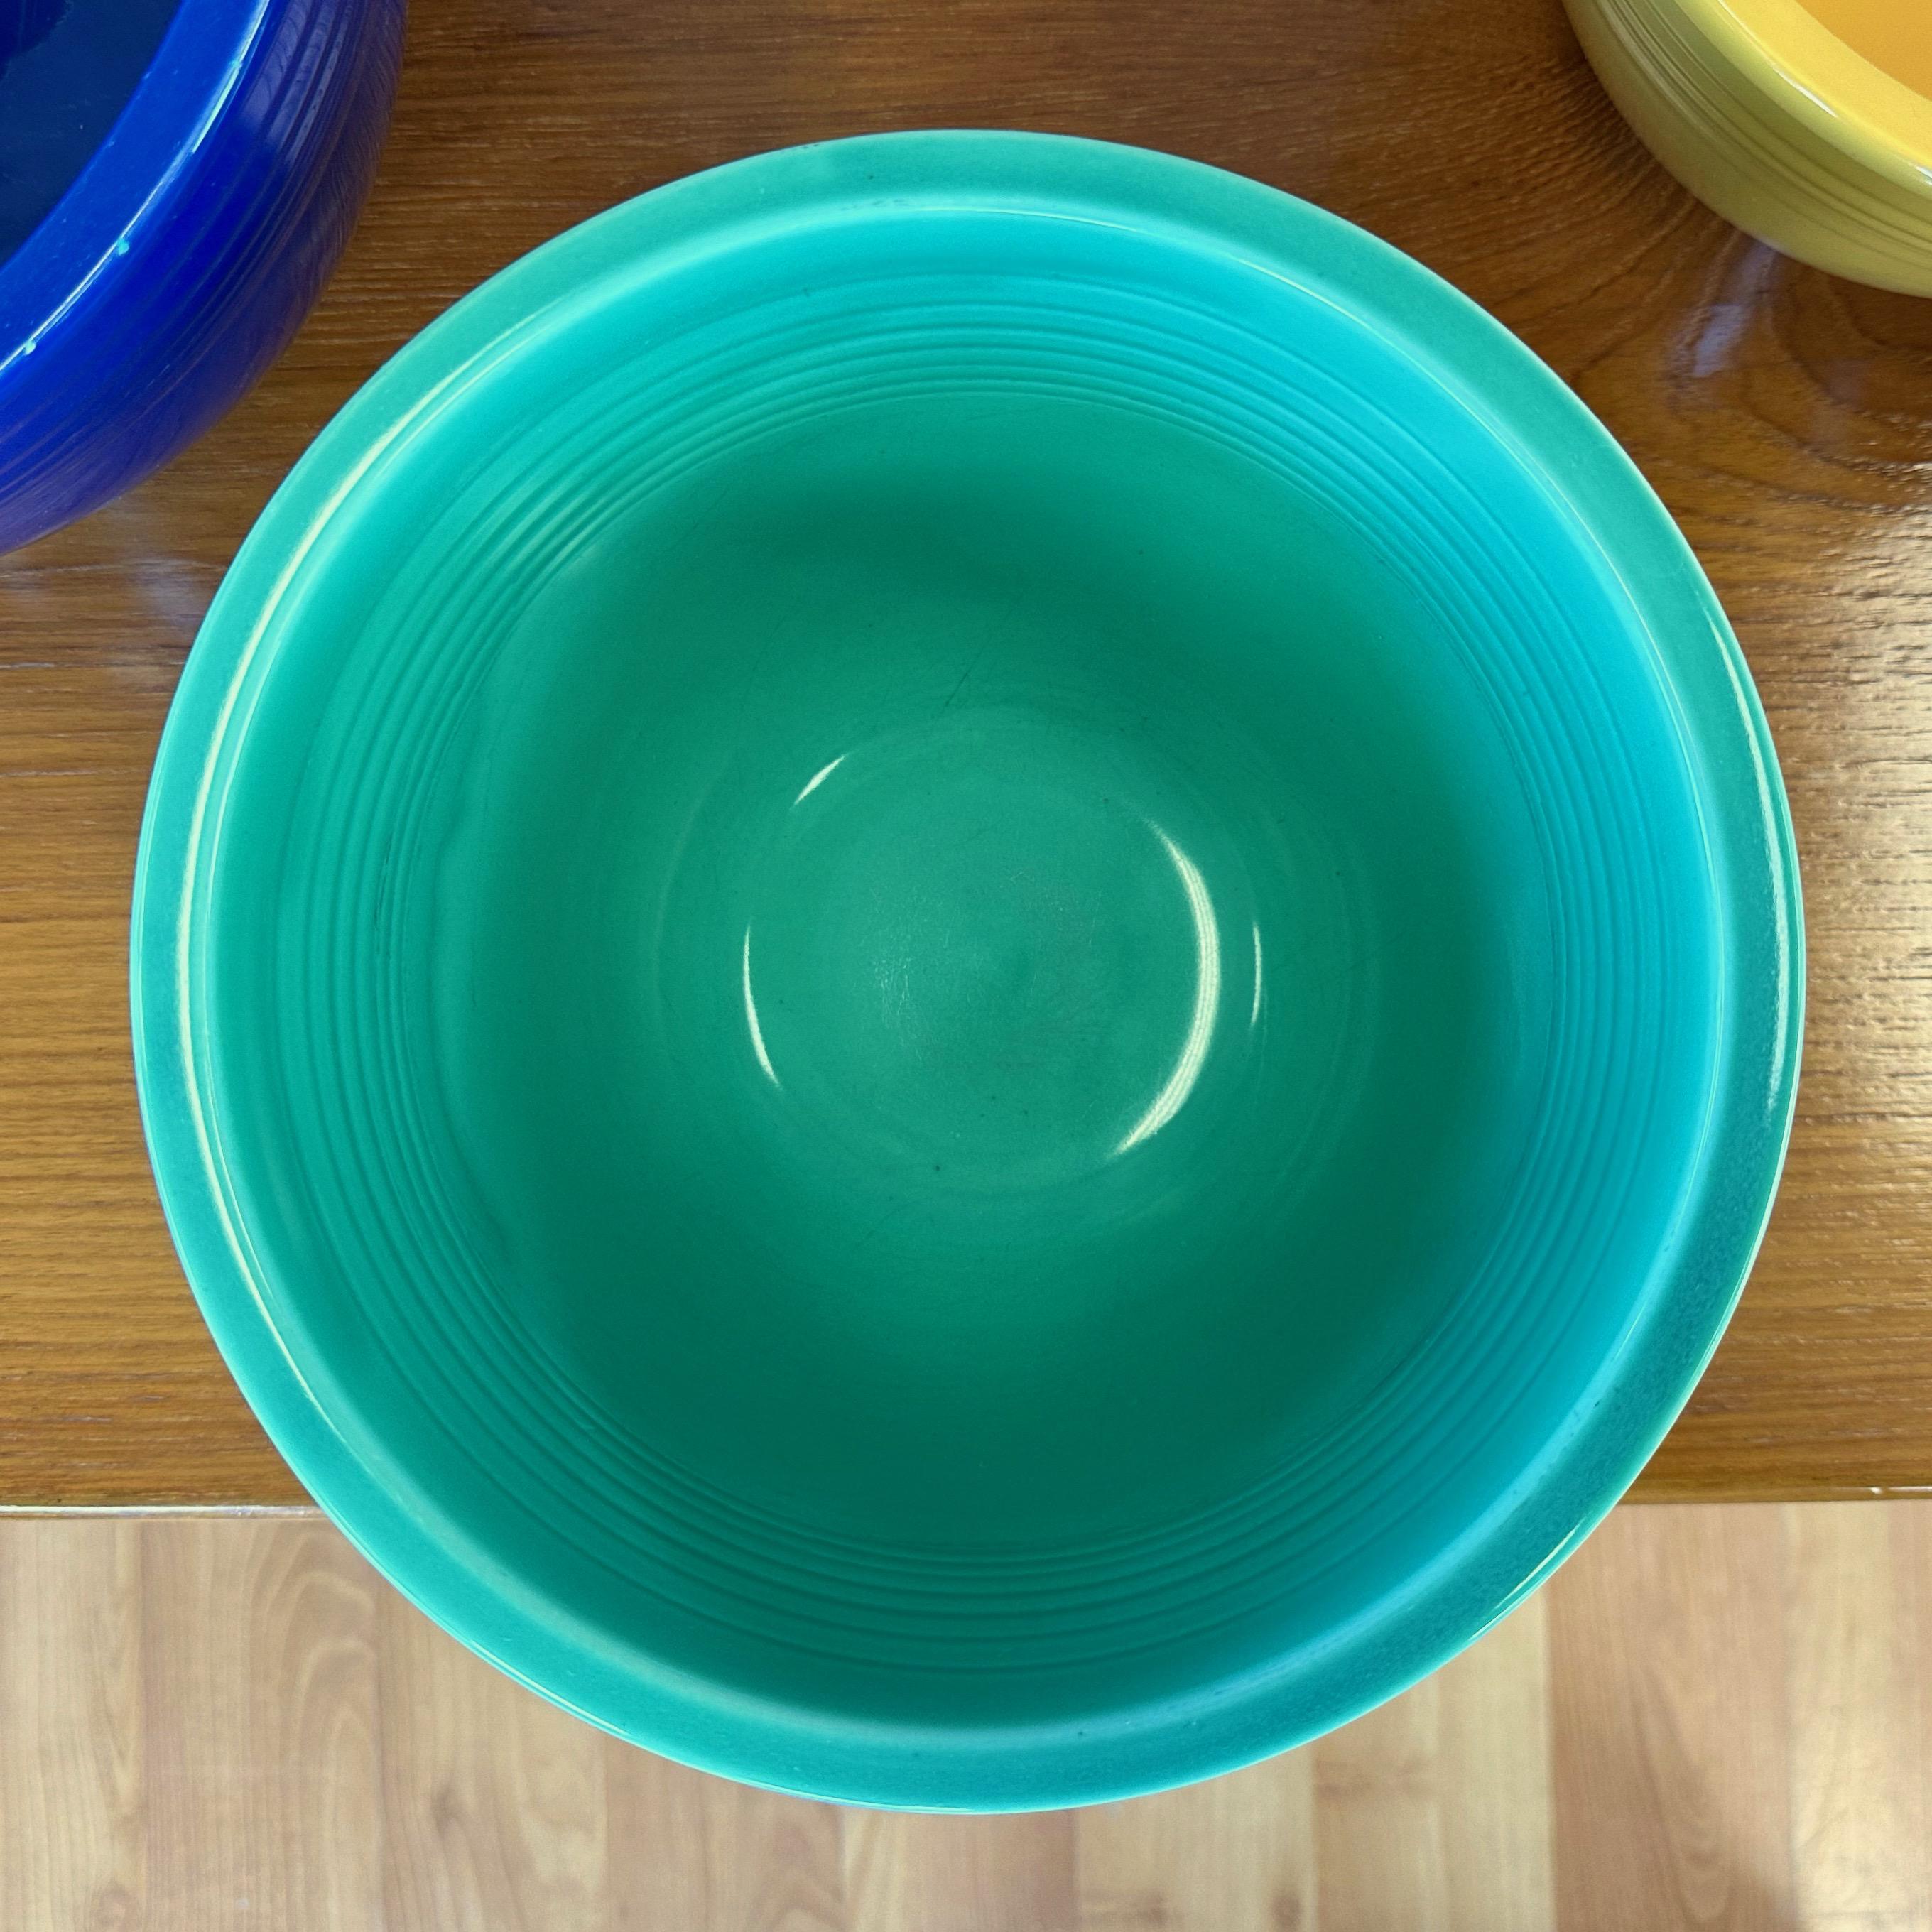 Early Vintage Fiestaware Nesting Mixing Bowls, Multi-Color Set of Six, c. 1940 For Sale 3